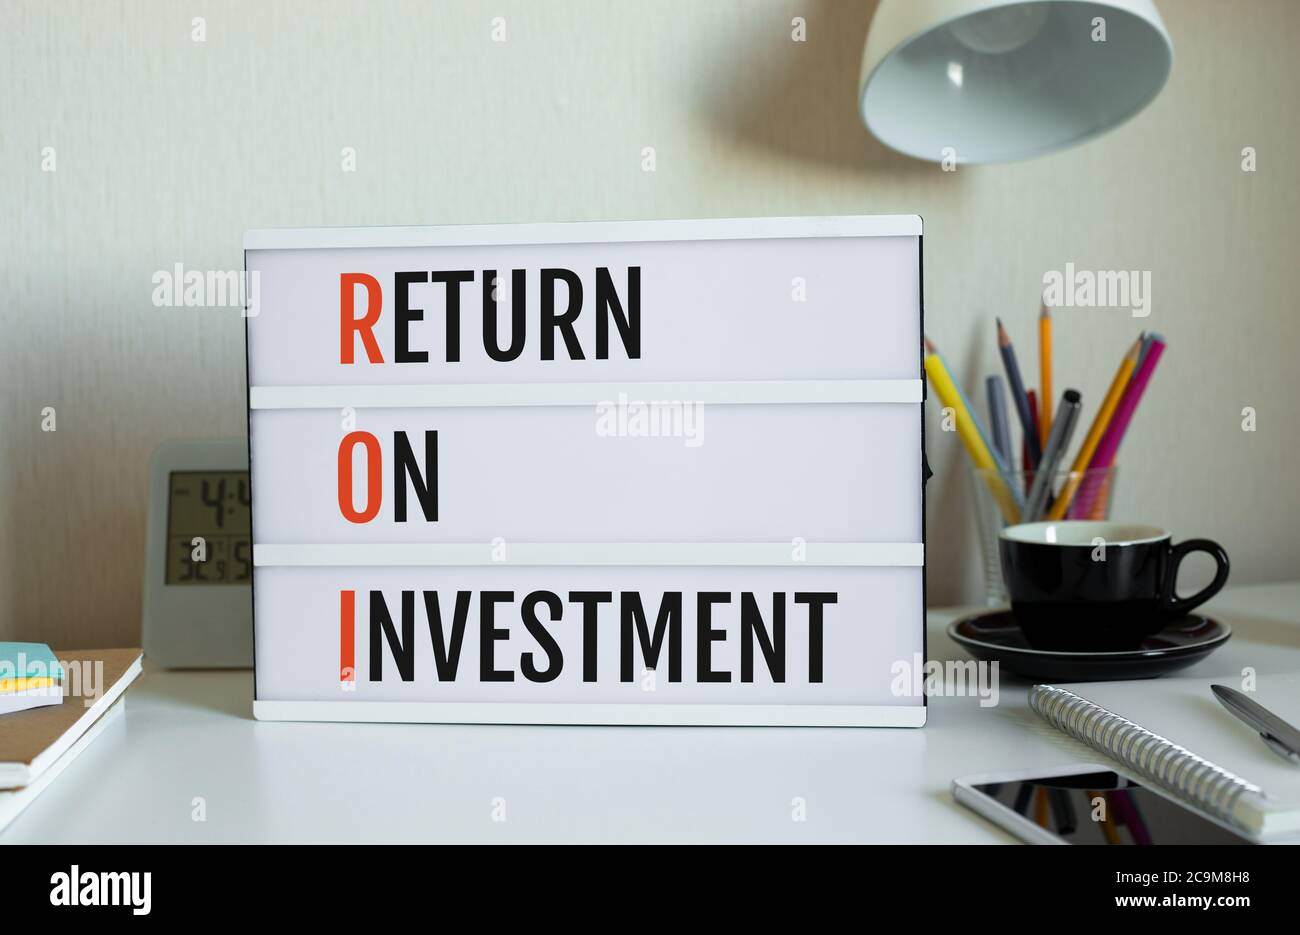 Return on investment concepts.business success.invester plan.profit and growth.stock market situation Stock Photo